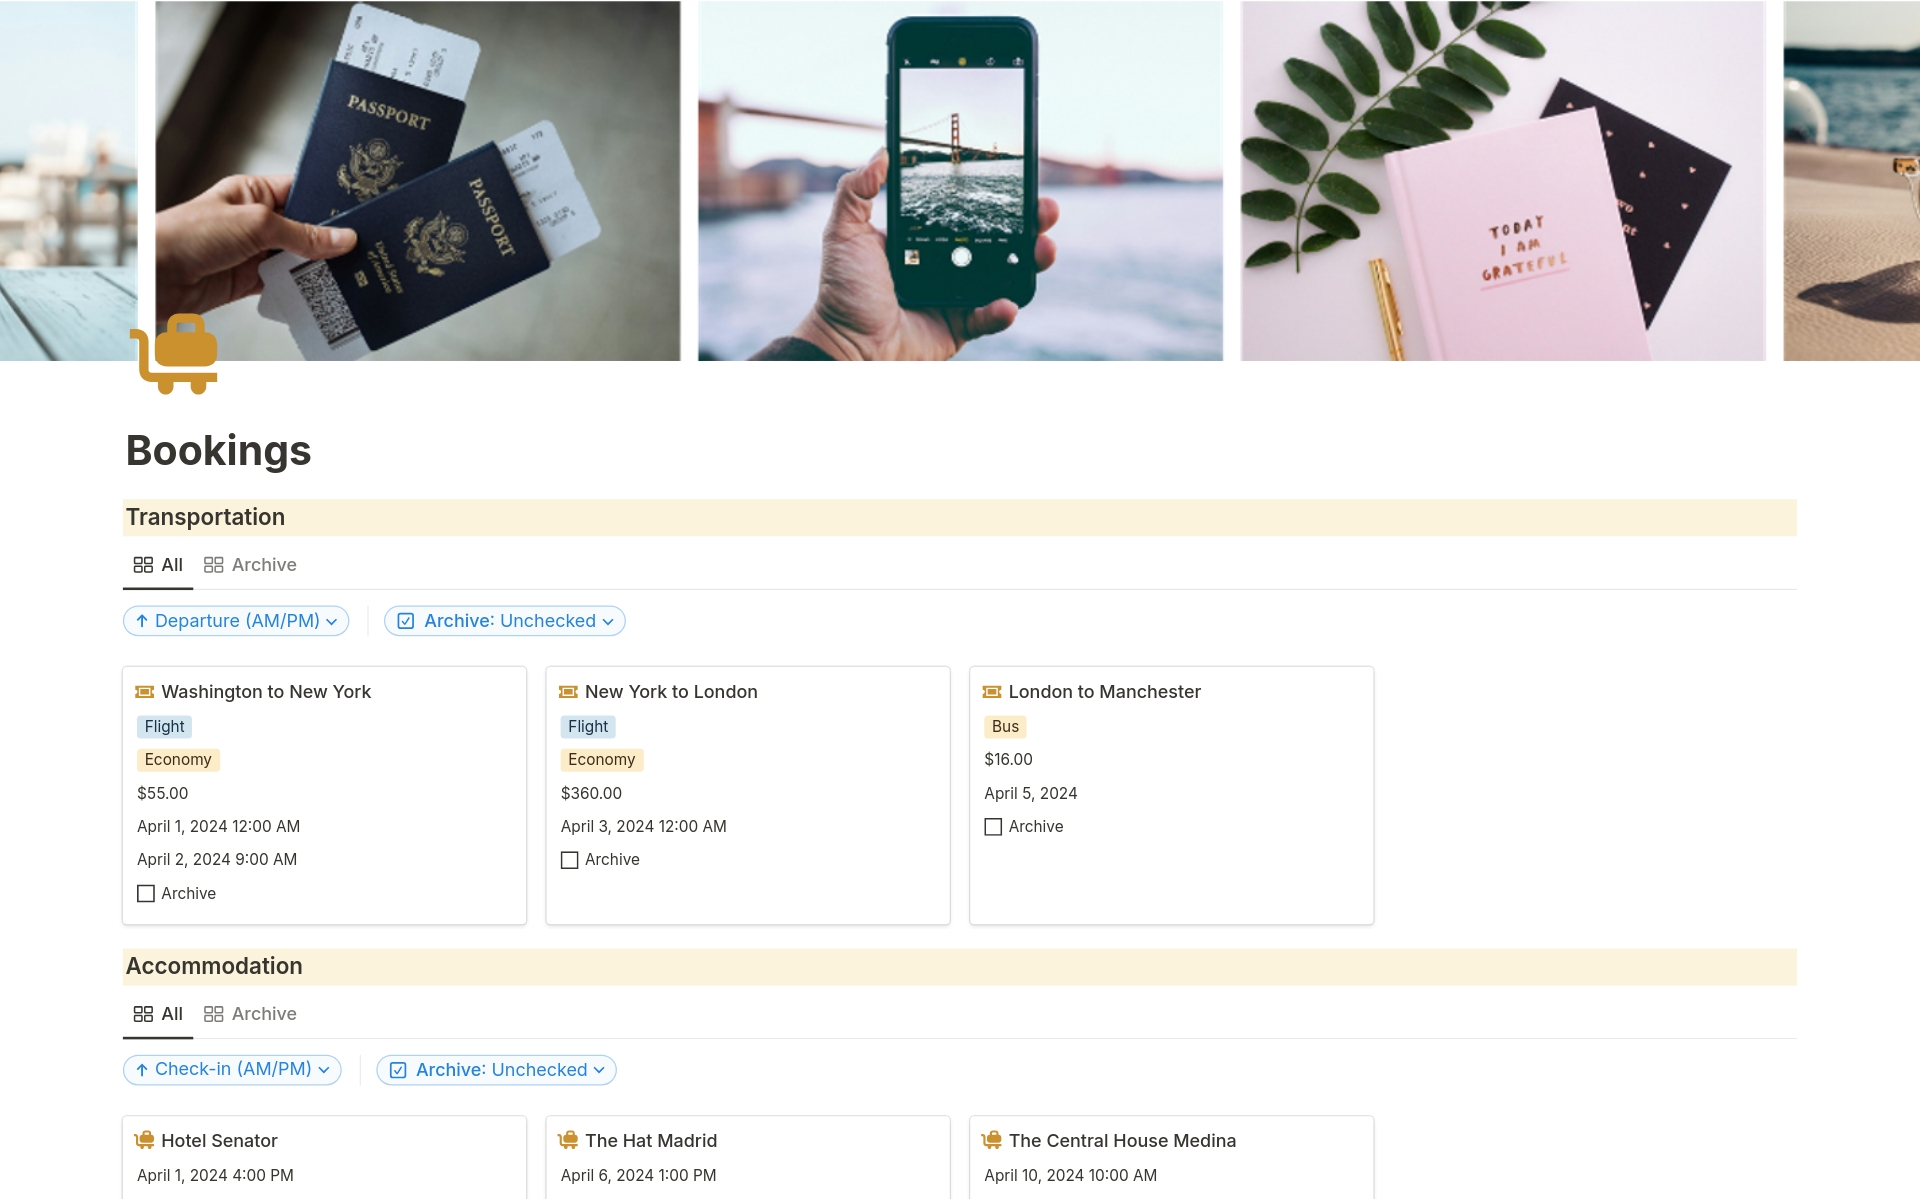 Streamline your travel plans with our All in One Notion Travel Planner Template! Effortlessly organize your packing list, trip itinerary, vacation essentials, and track your travel expenses in one convenient place.